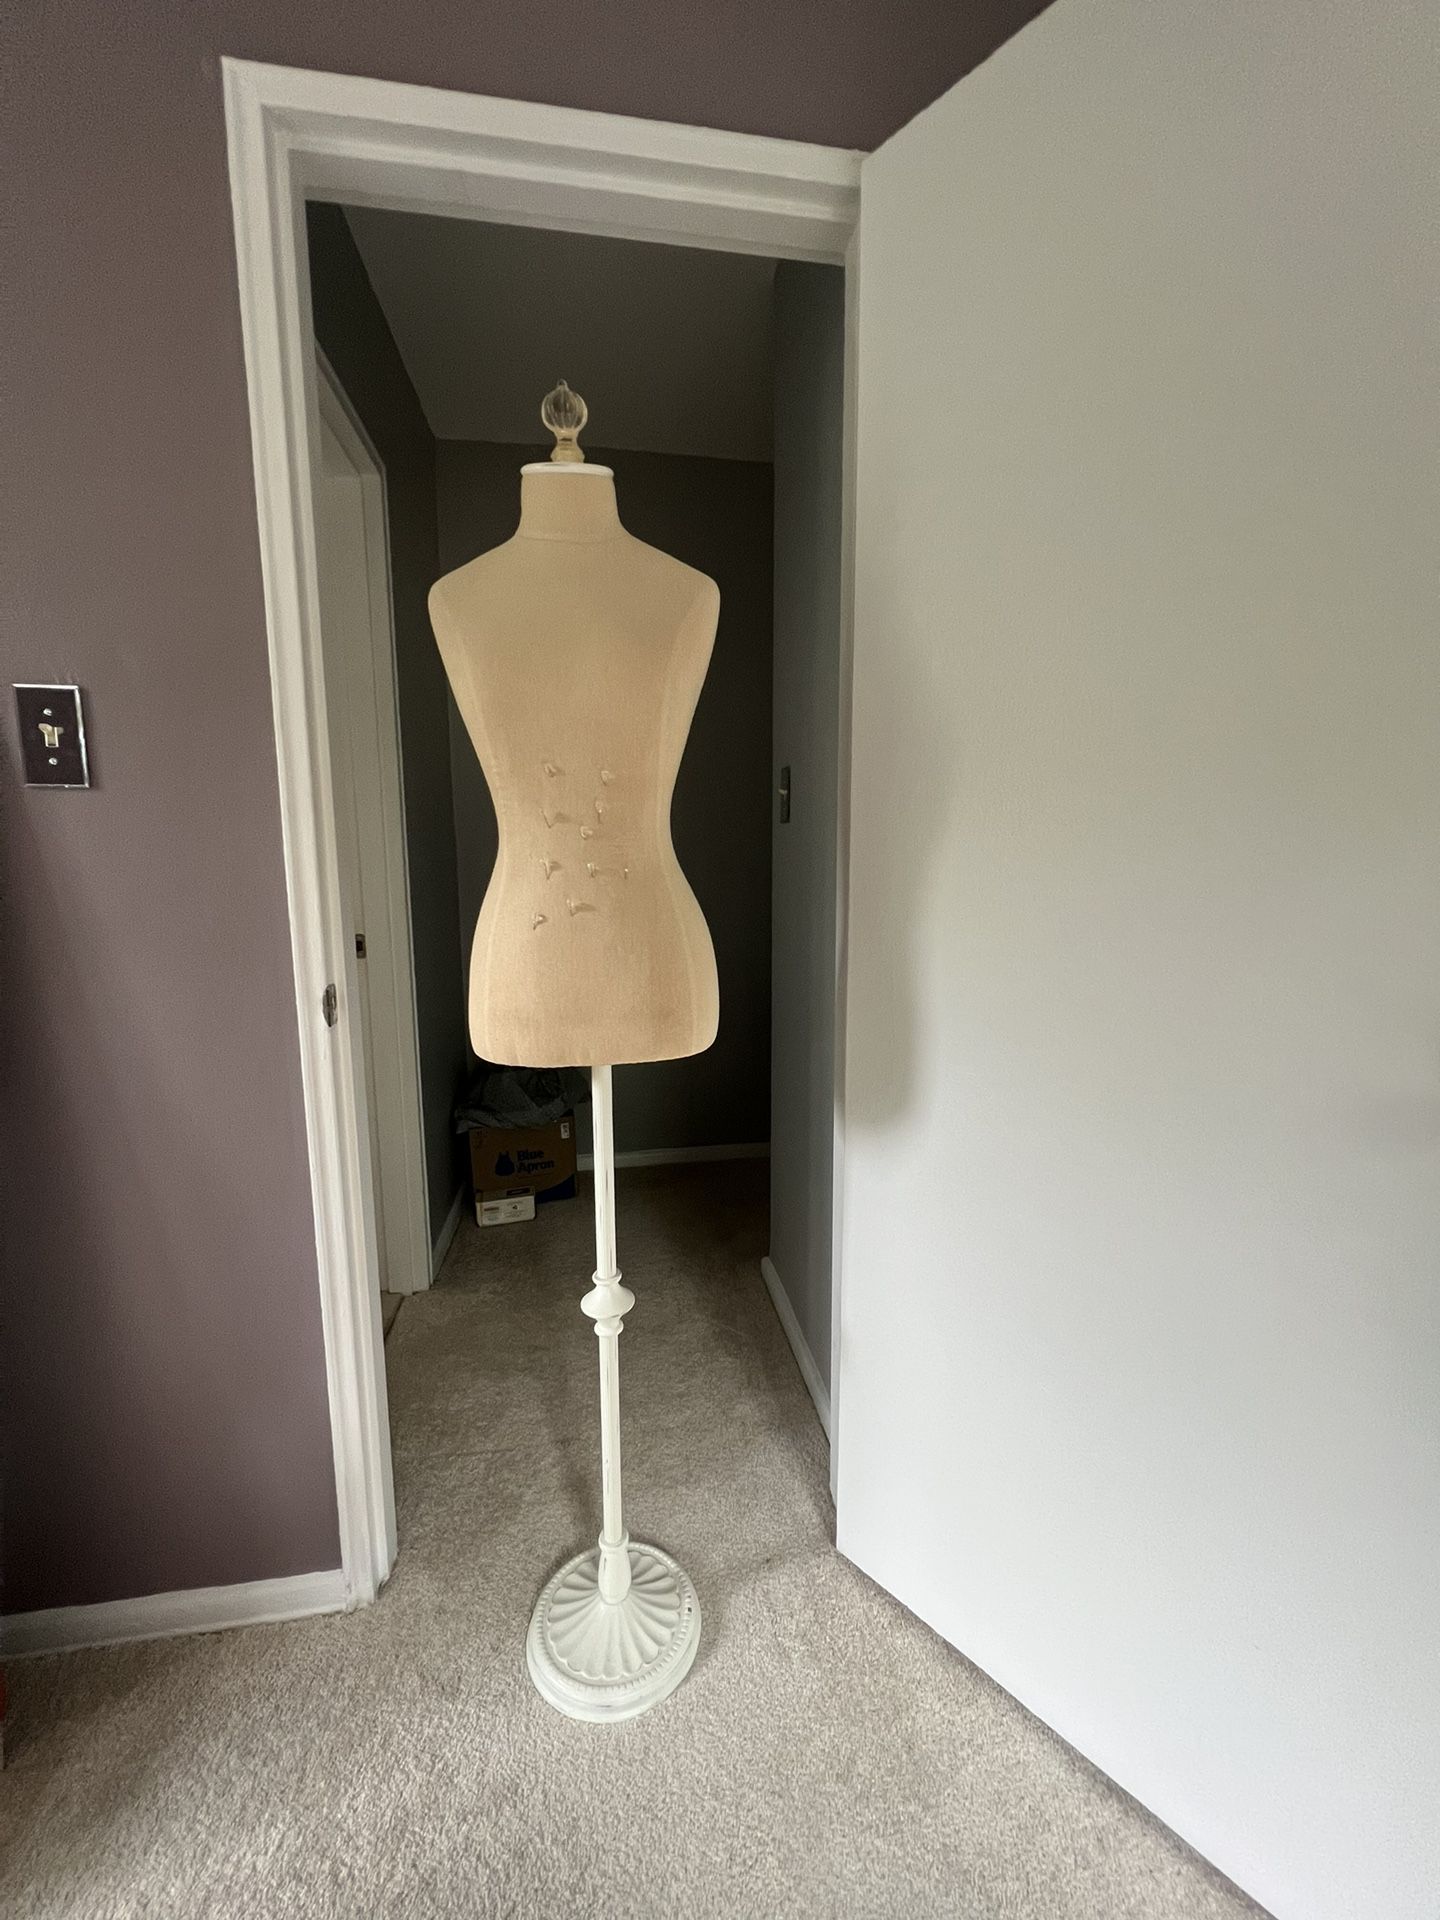 Female Mannequin, Mannequin Body Adjustable Dress Mannequin with Stand Wood  Base for Sale in Pompano Beach, FL - OfferUp